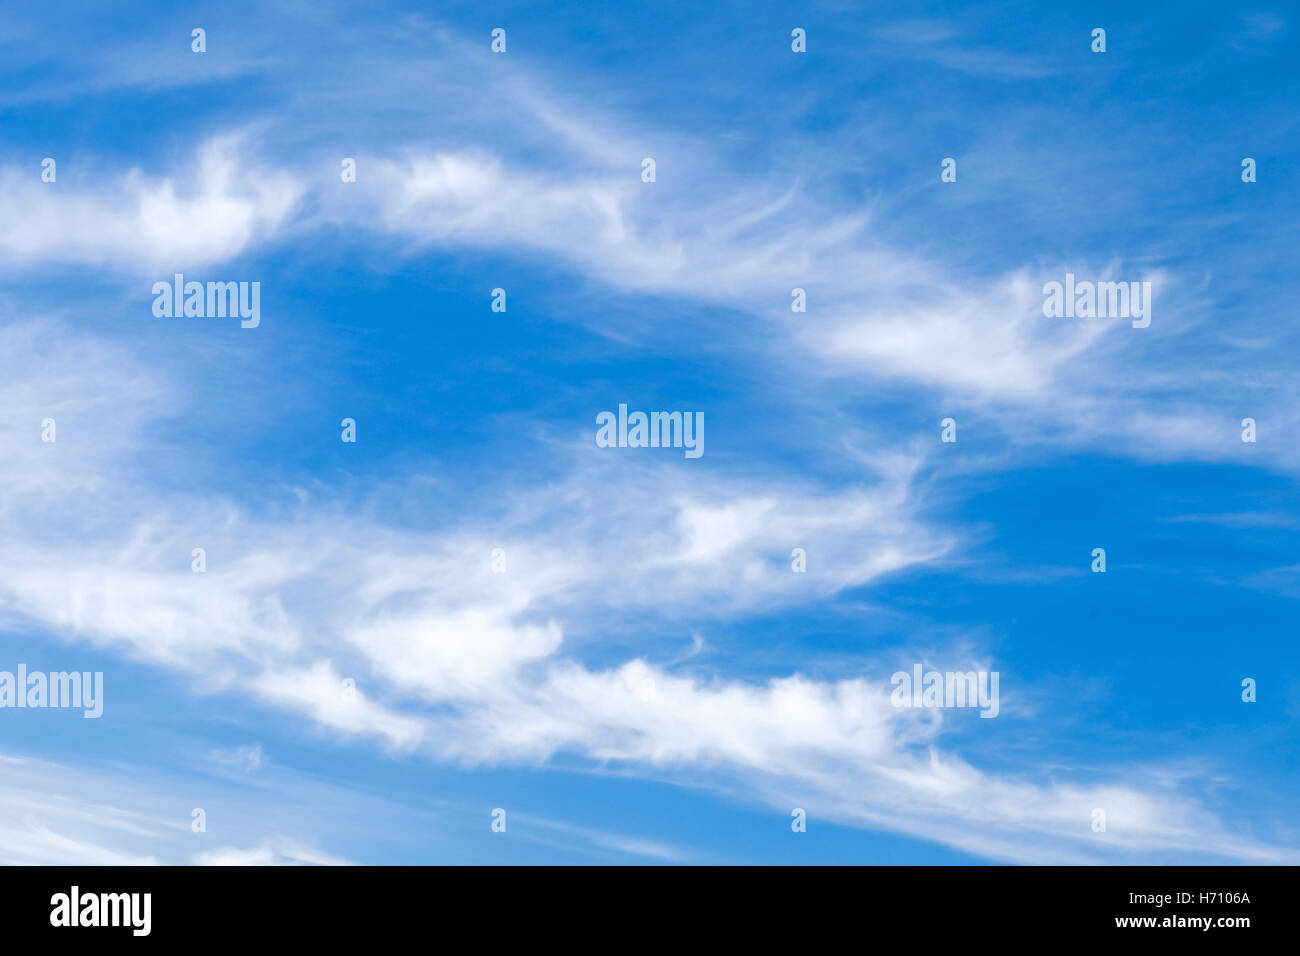 Natural blue cloudy sky at daytime. Background photo texture Stock Photo